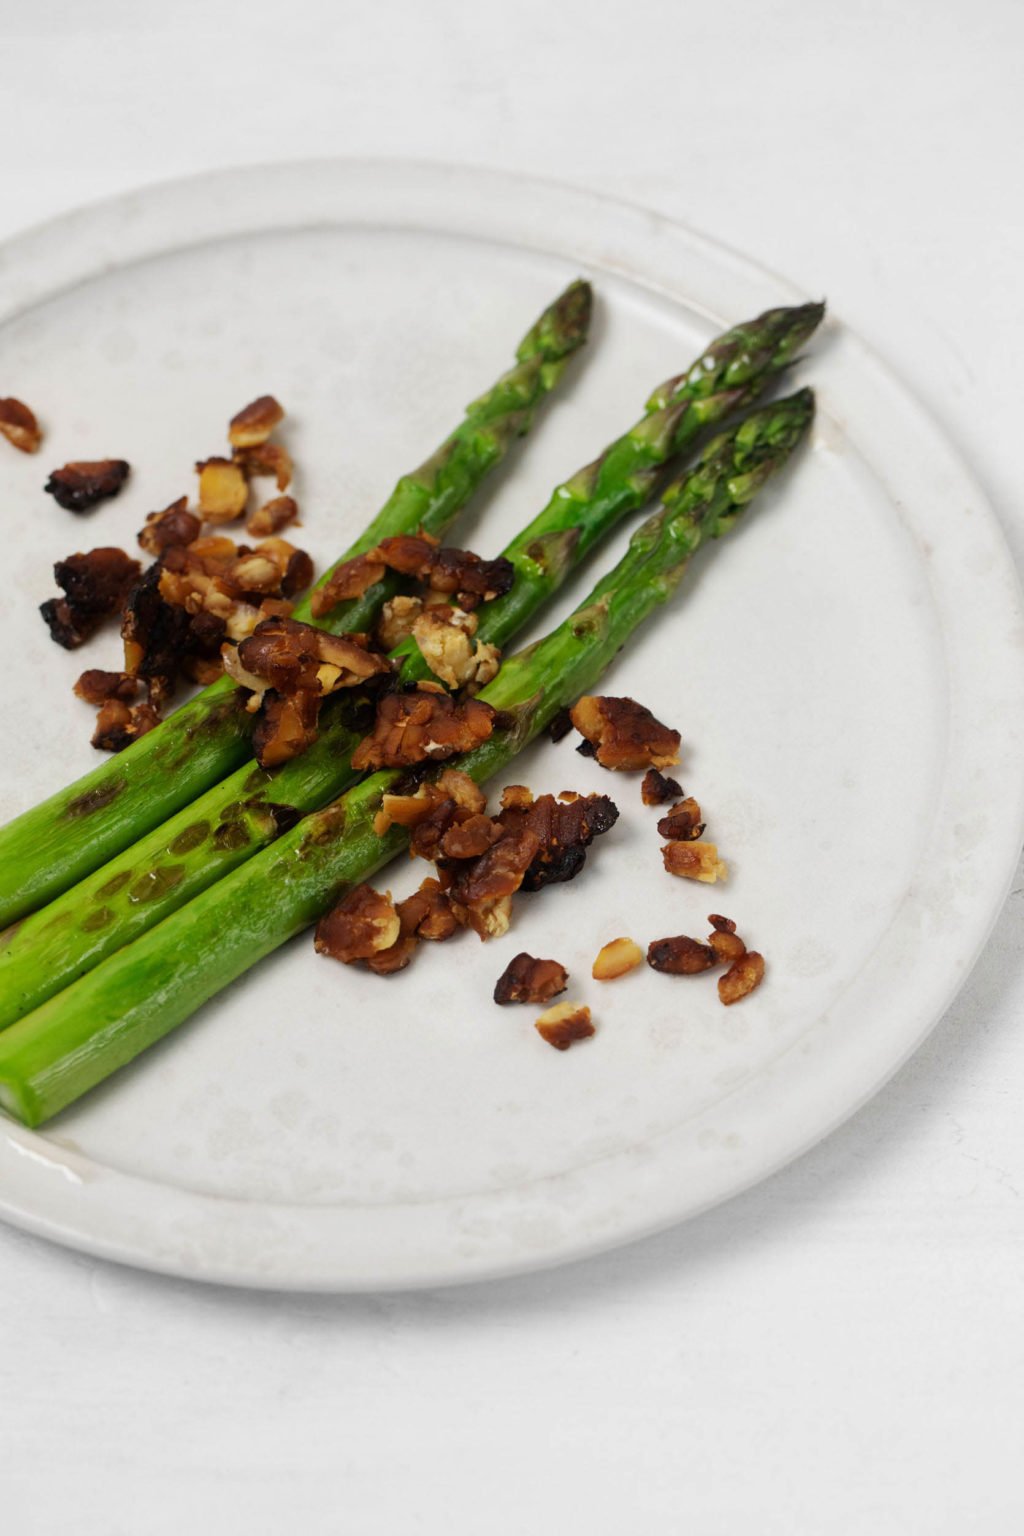 Green asparagus spears have been topped with a plant-based, crumbled tempeh 